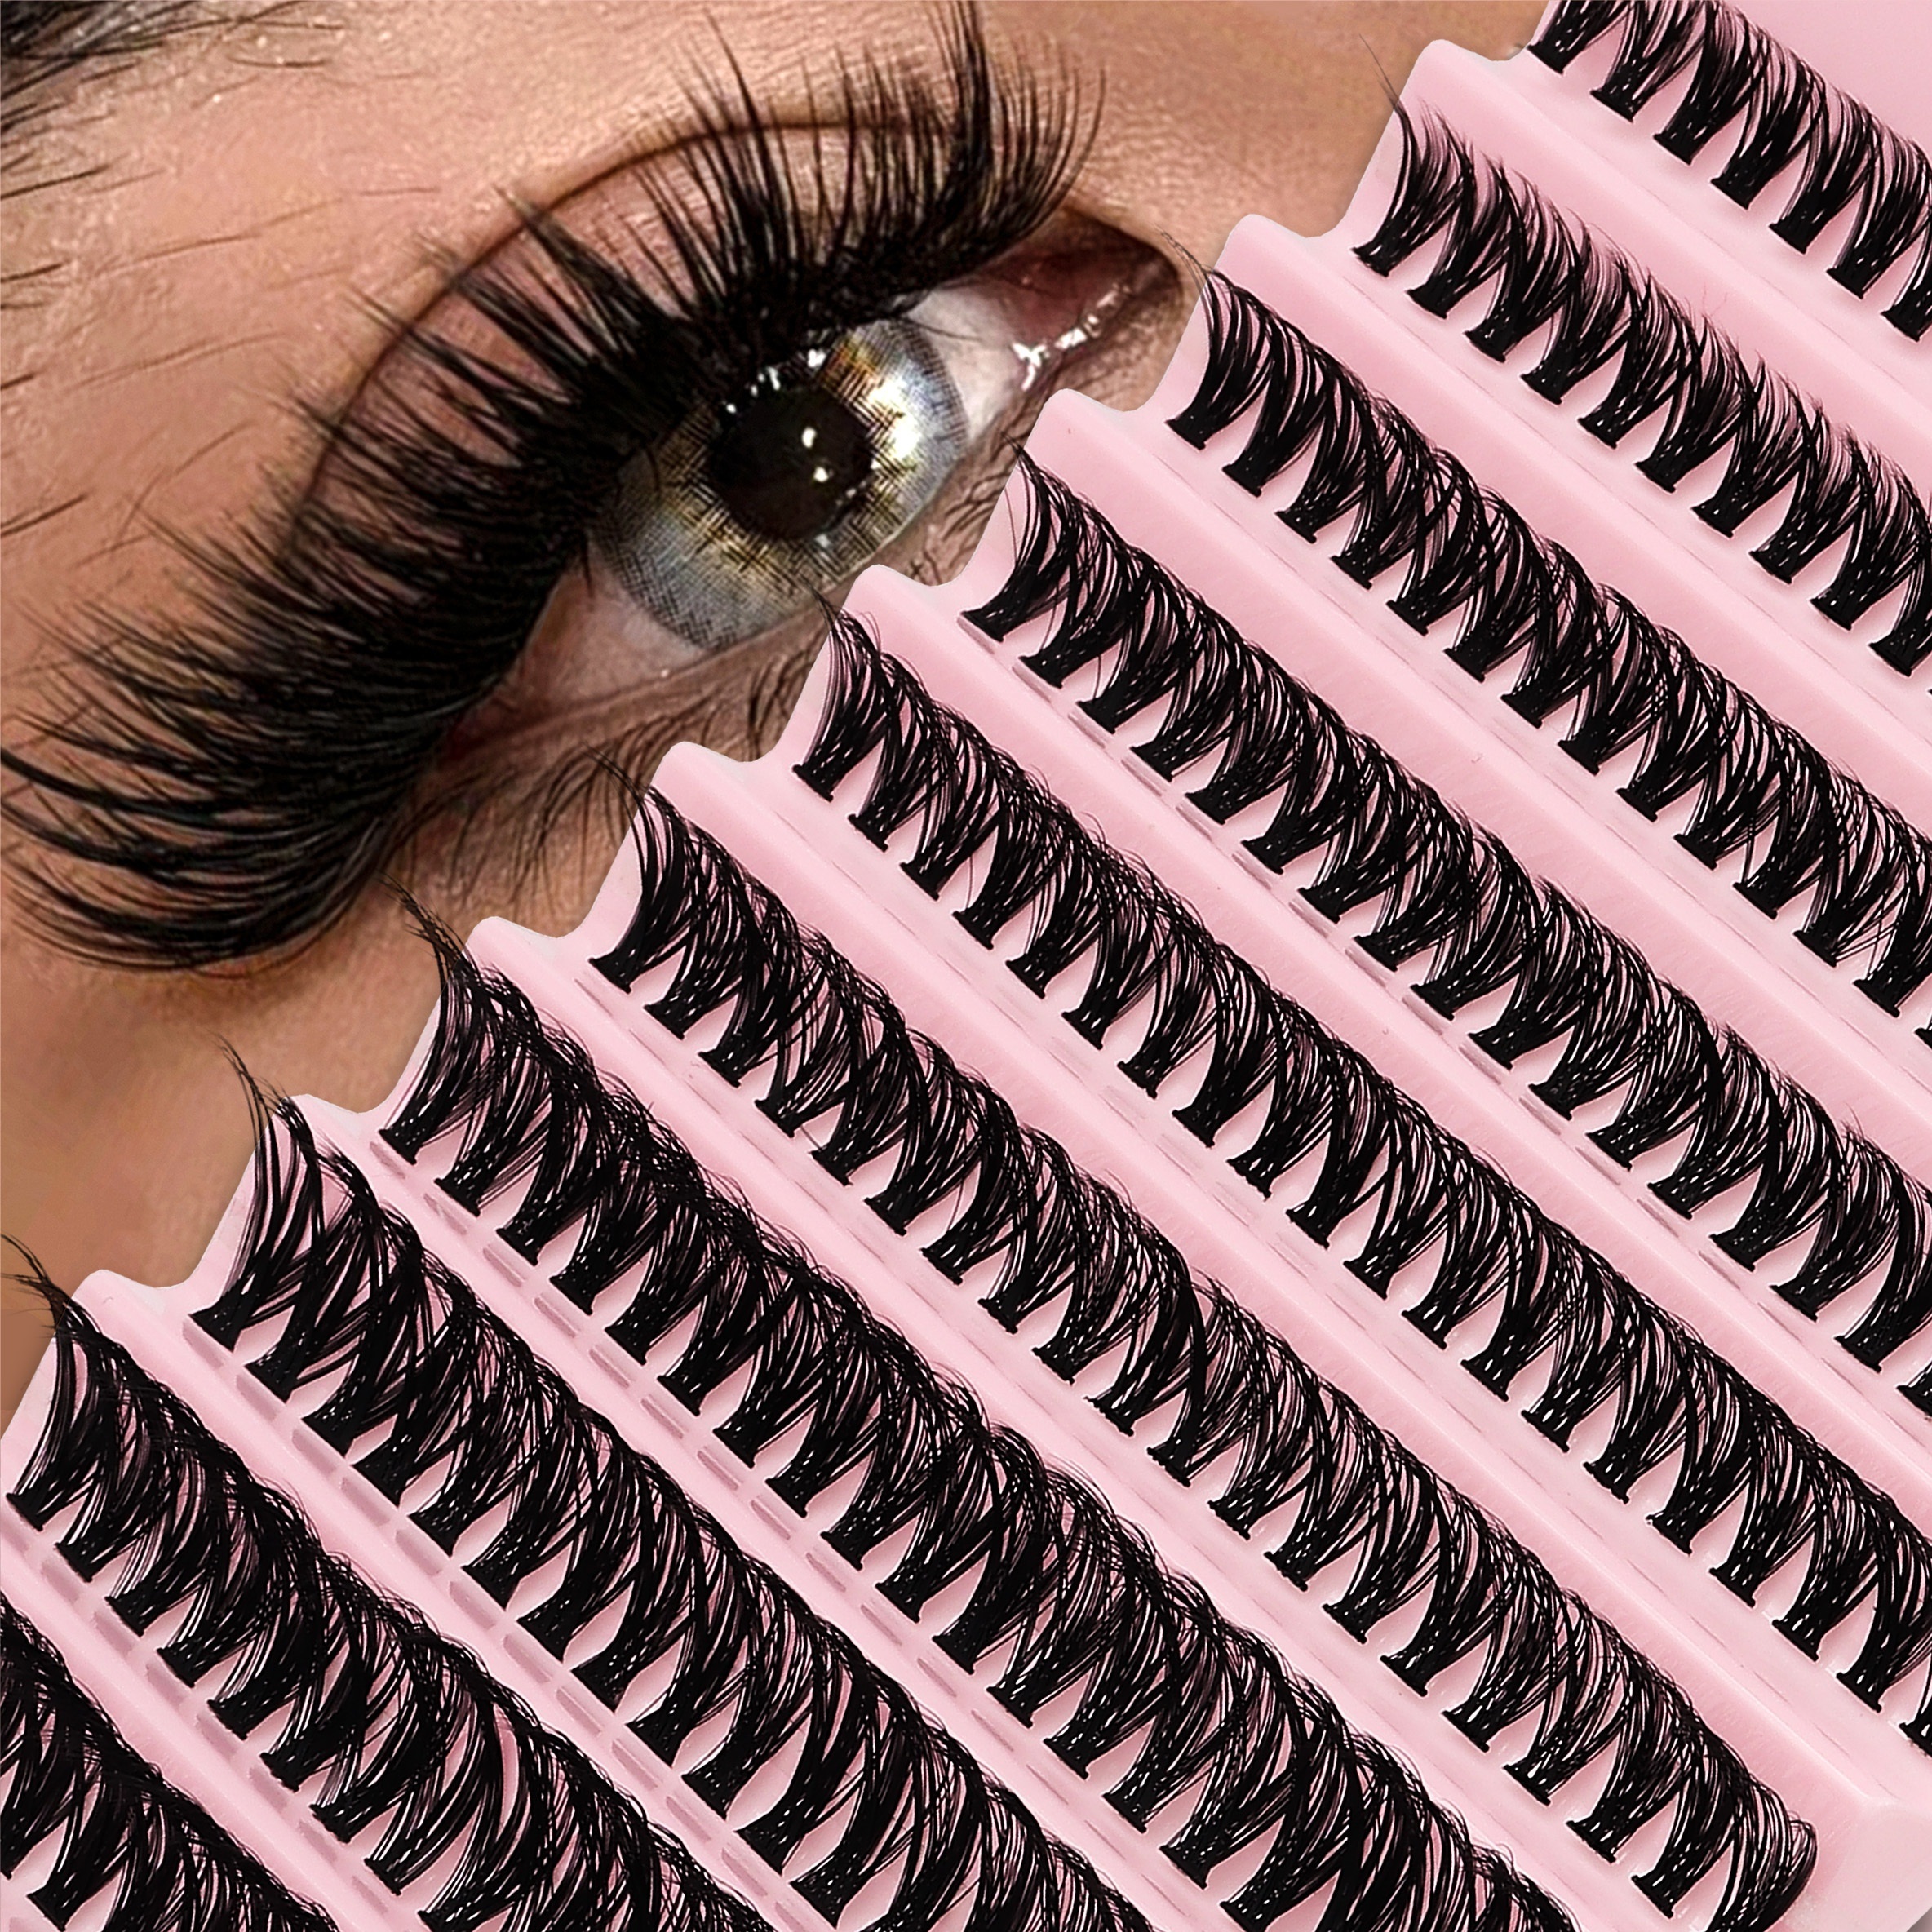 

Luxurious 40d Faux Mink Eyelashes - 200 Clusters, Natural D- Mix (10-16mm) For Thick, Fluffy 3d Effect - Beginner Friendly & Reusable